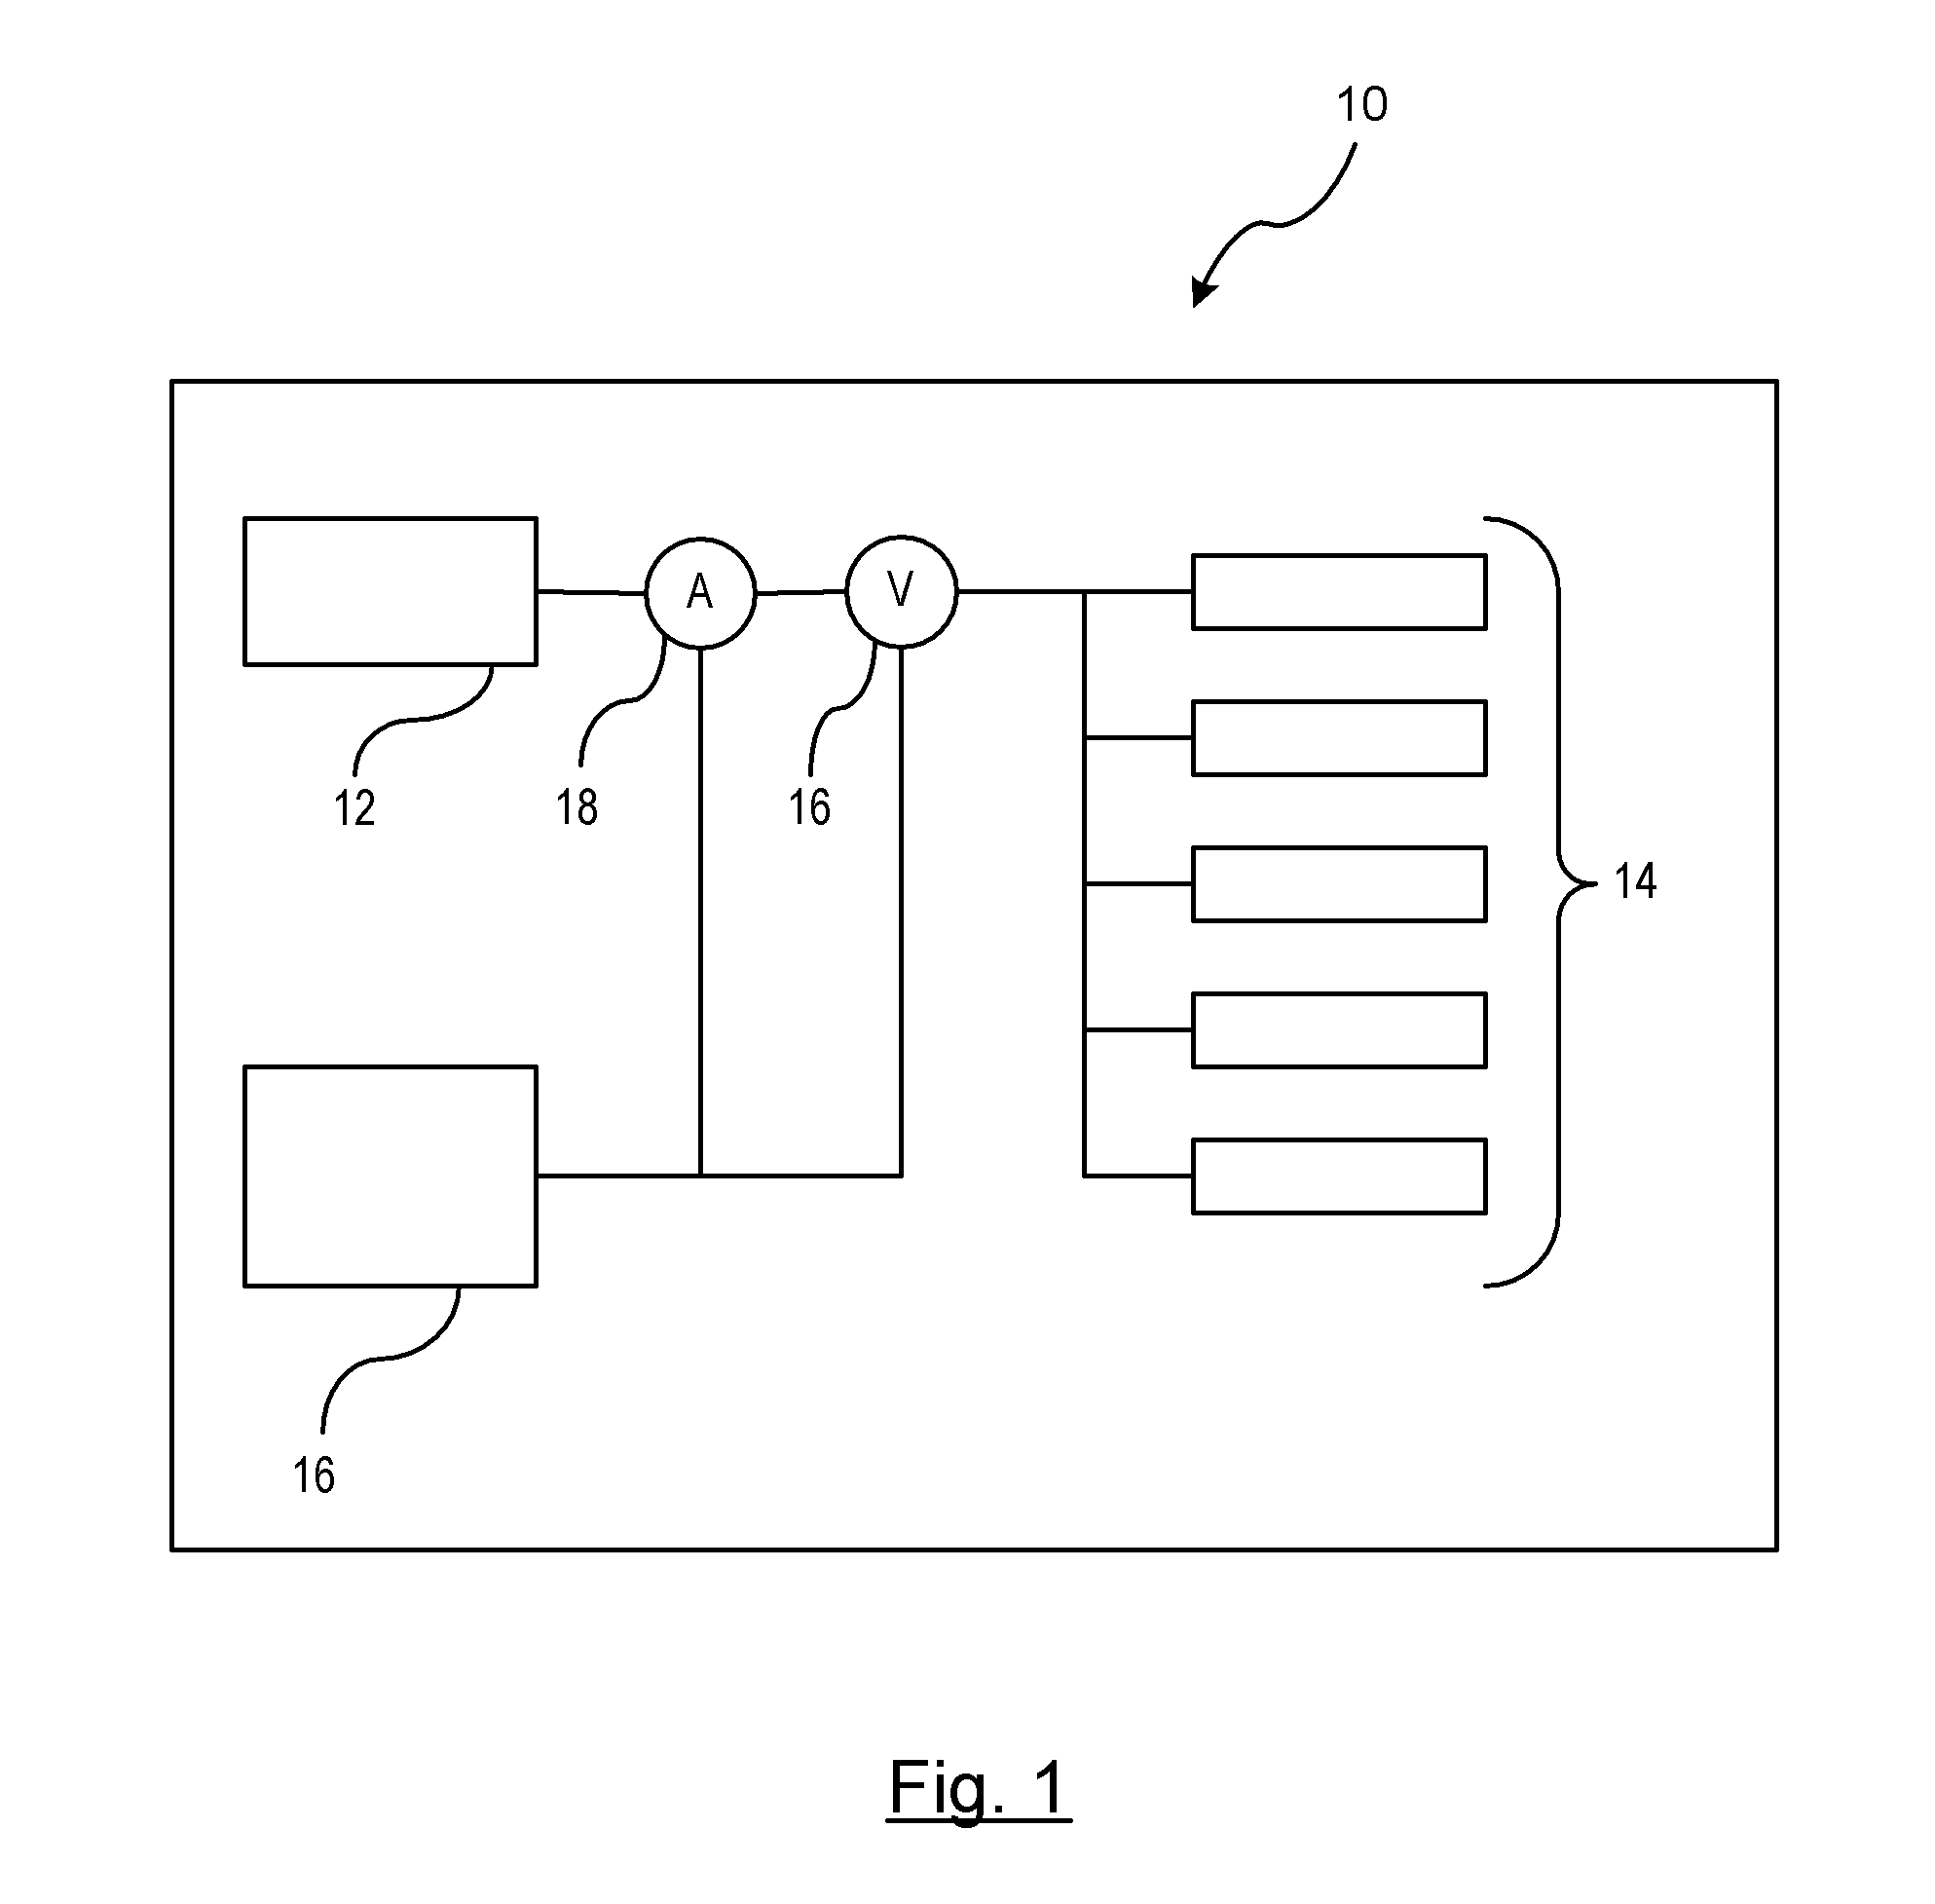 Method and Apparatus for Estimating Battery Capacity of a Battery